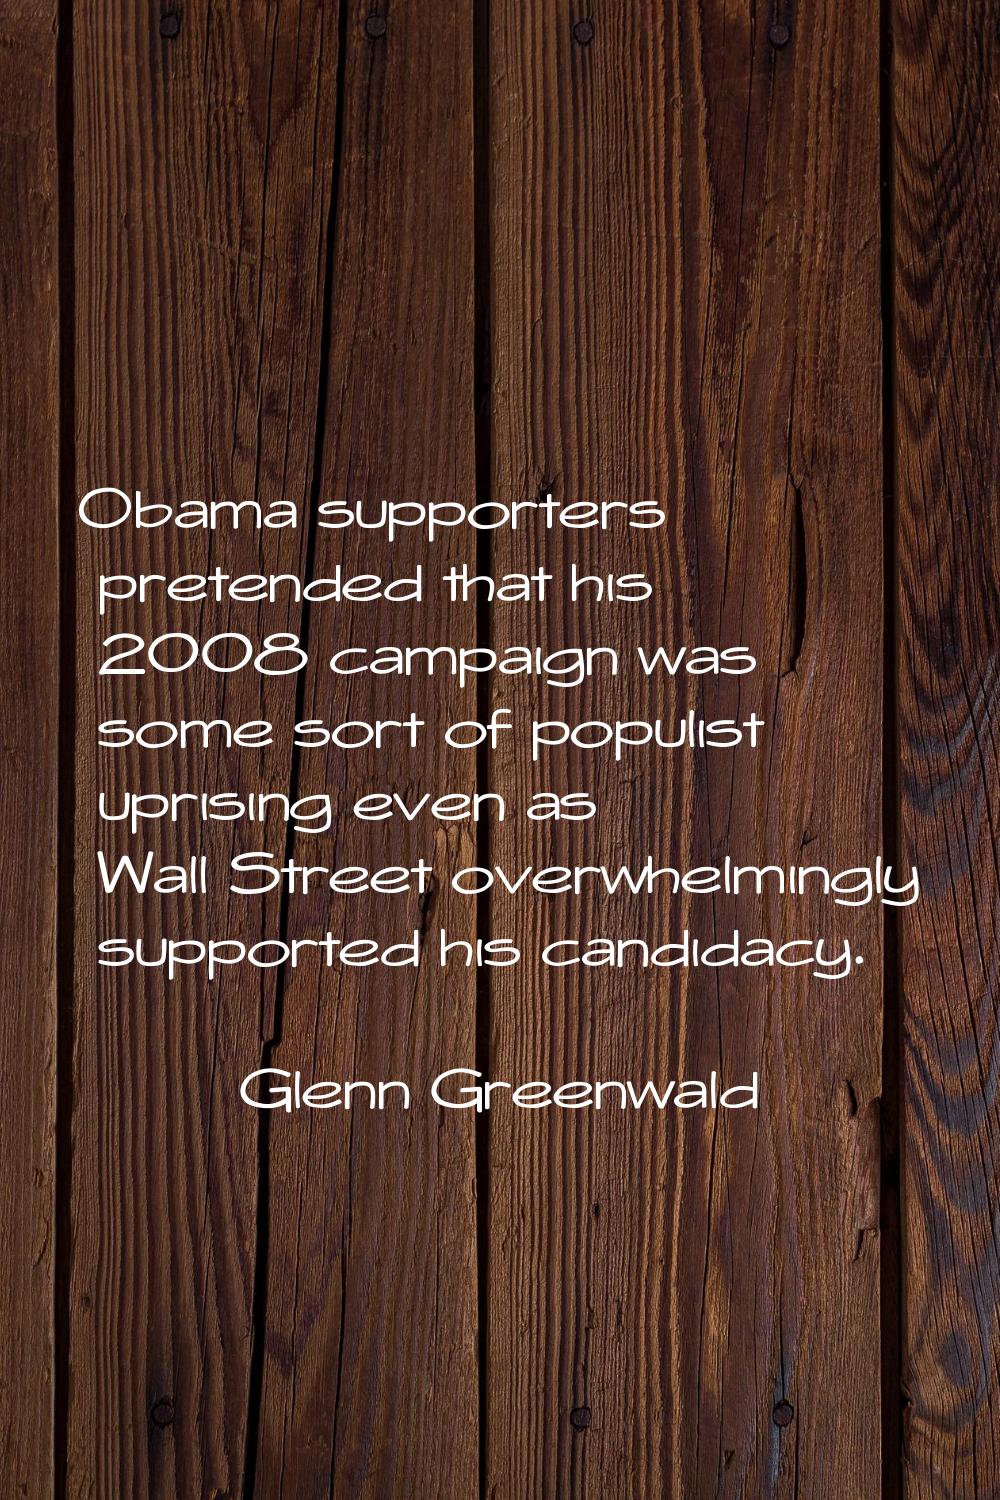 Obama supporters pretended that his 2008 campaign was some sort of populist uprising even as Wall S